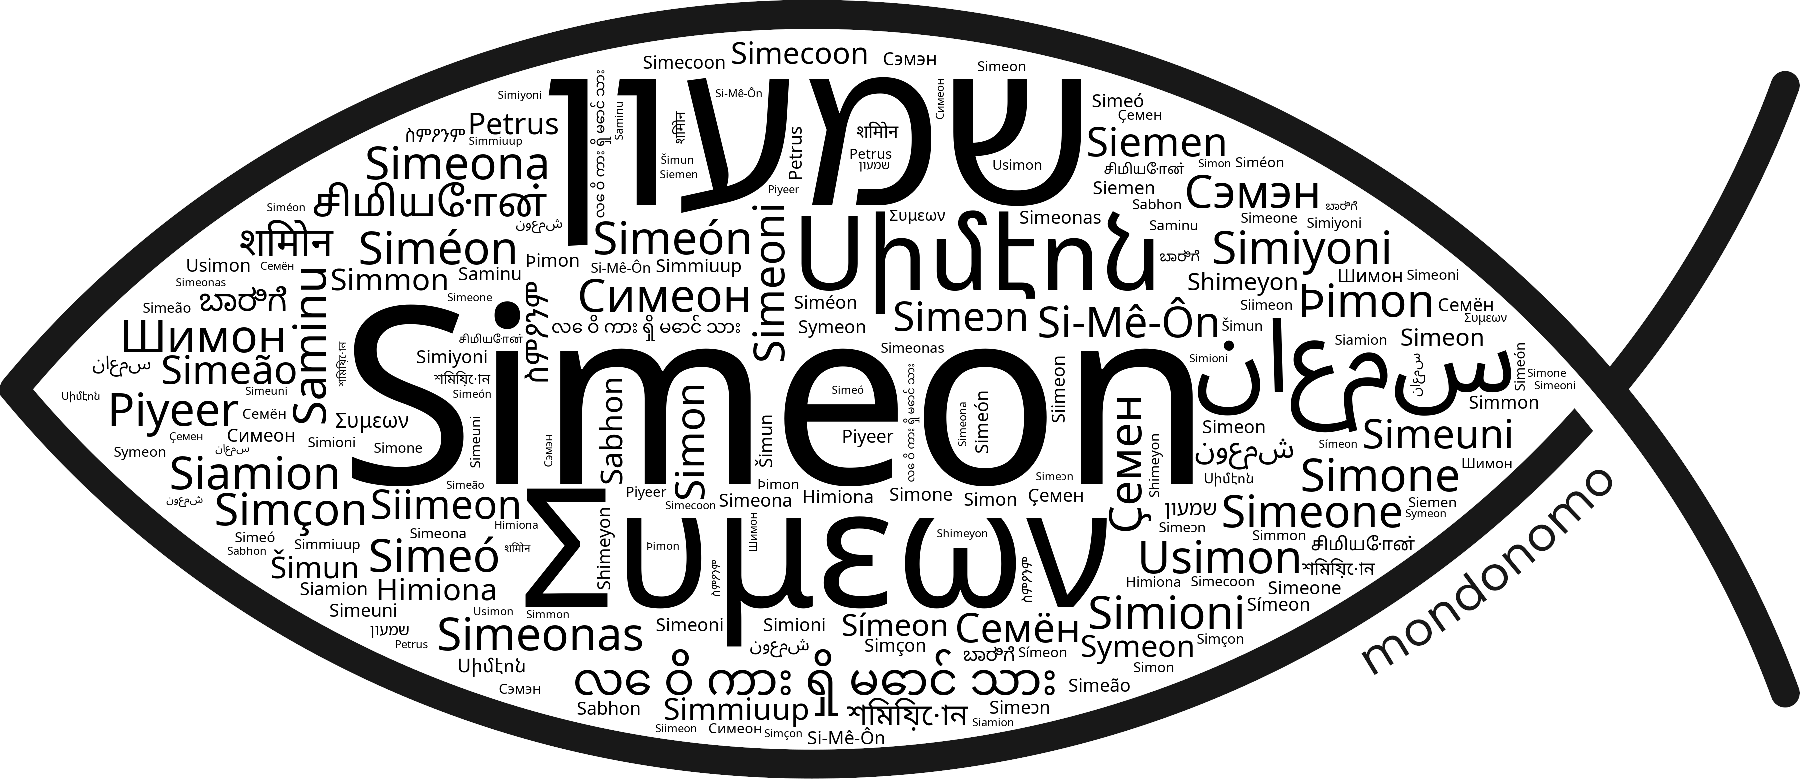 Name Simeon in the world's Bibles